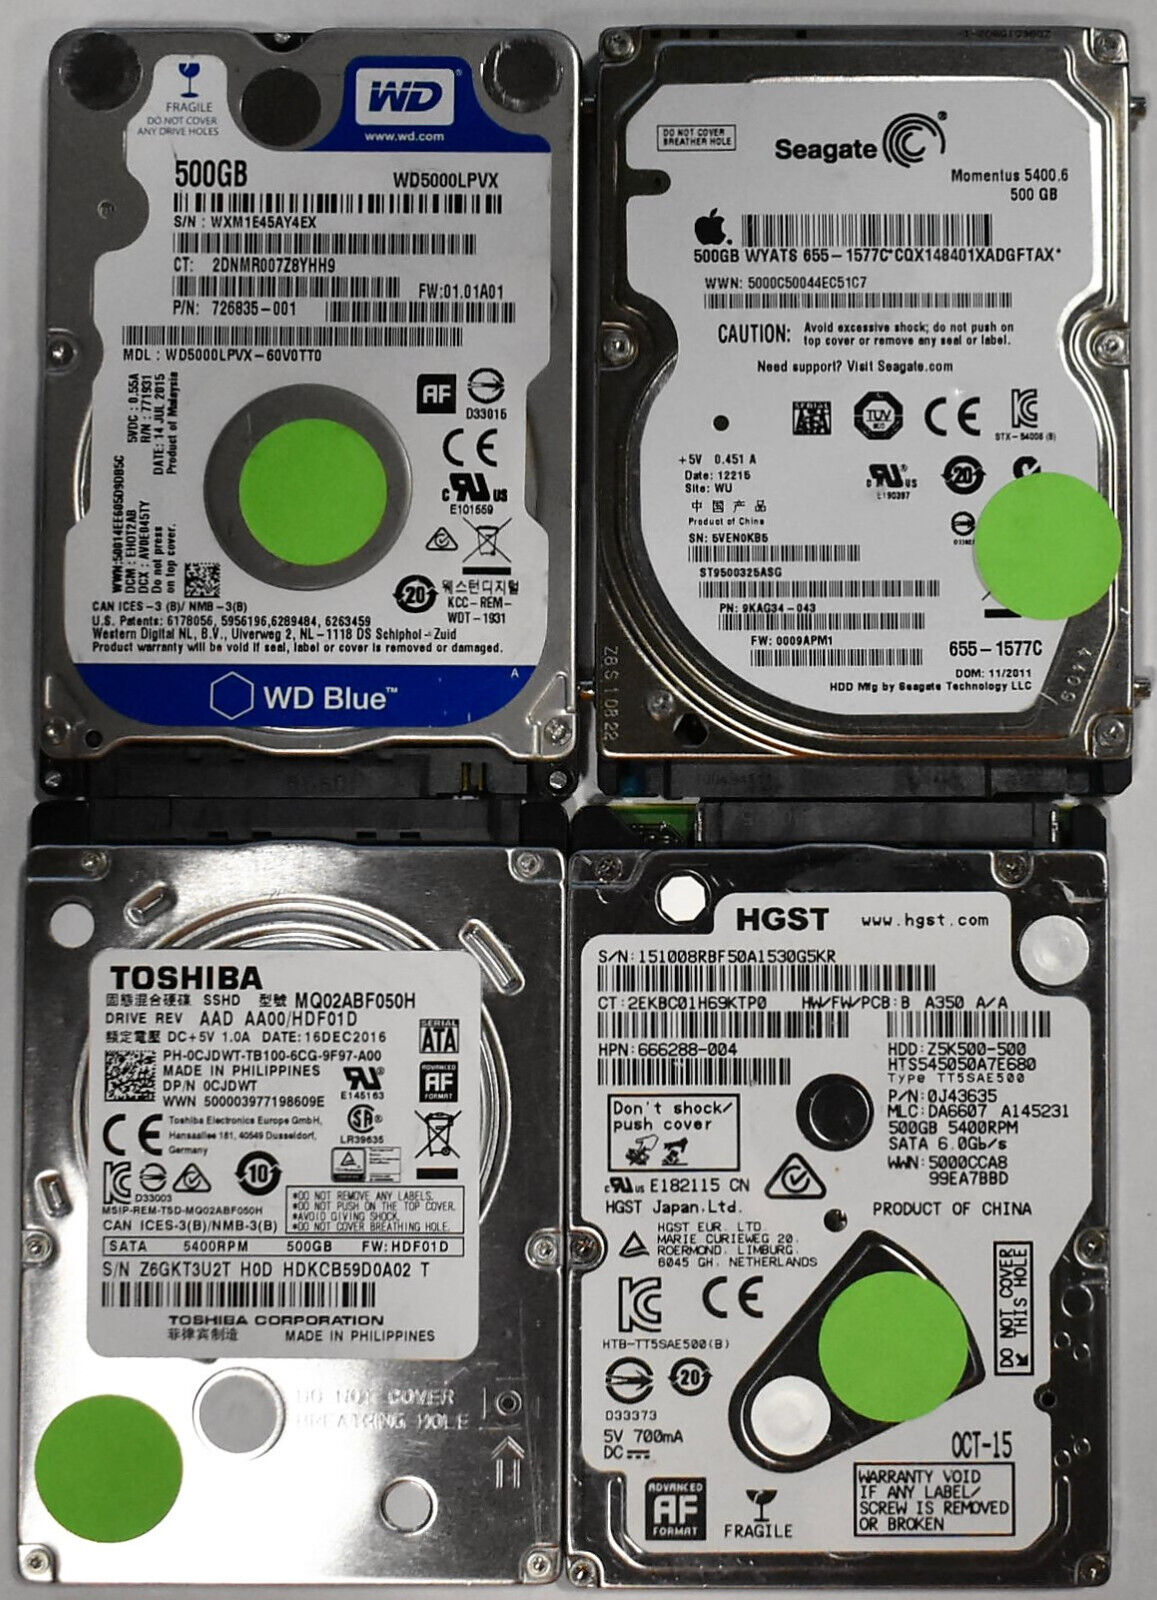 Lot of 20 500GB 2.5" Laptop SATA Hard Drives Mix Brand Seagate WD Hitachi Toshib Not specified Does not apply